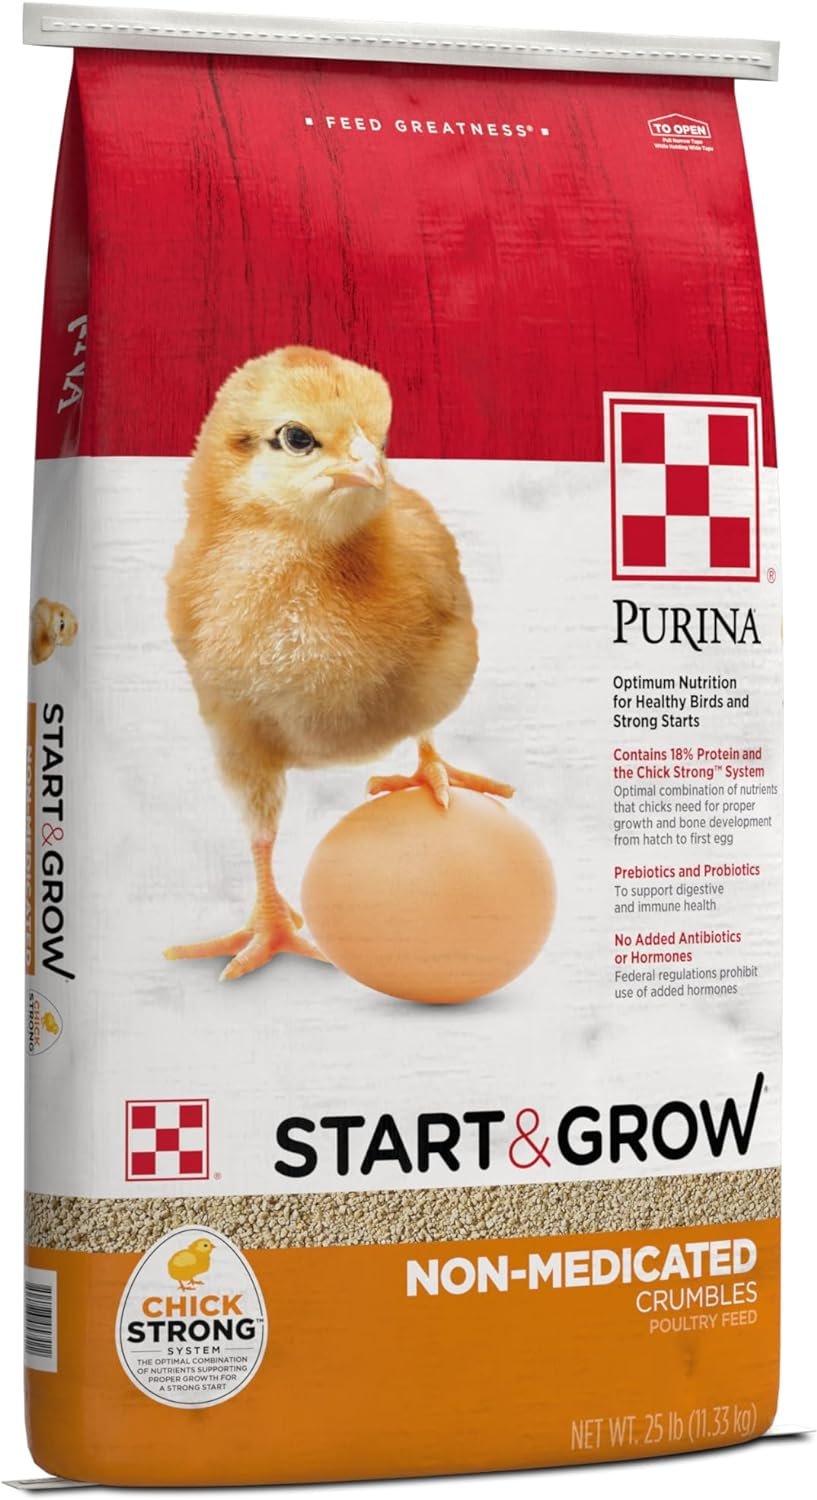 Purina Start and Grow | Non-Medicated Chick Feed Crumbles | Nutritionally Complete - 25 Pound (25 lb.) Bag